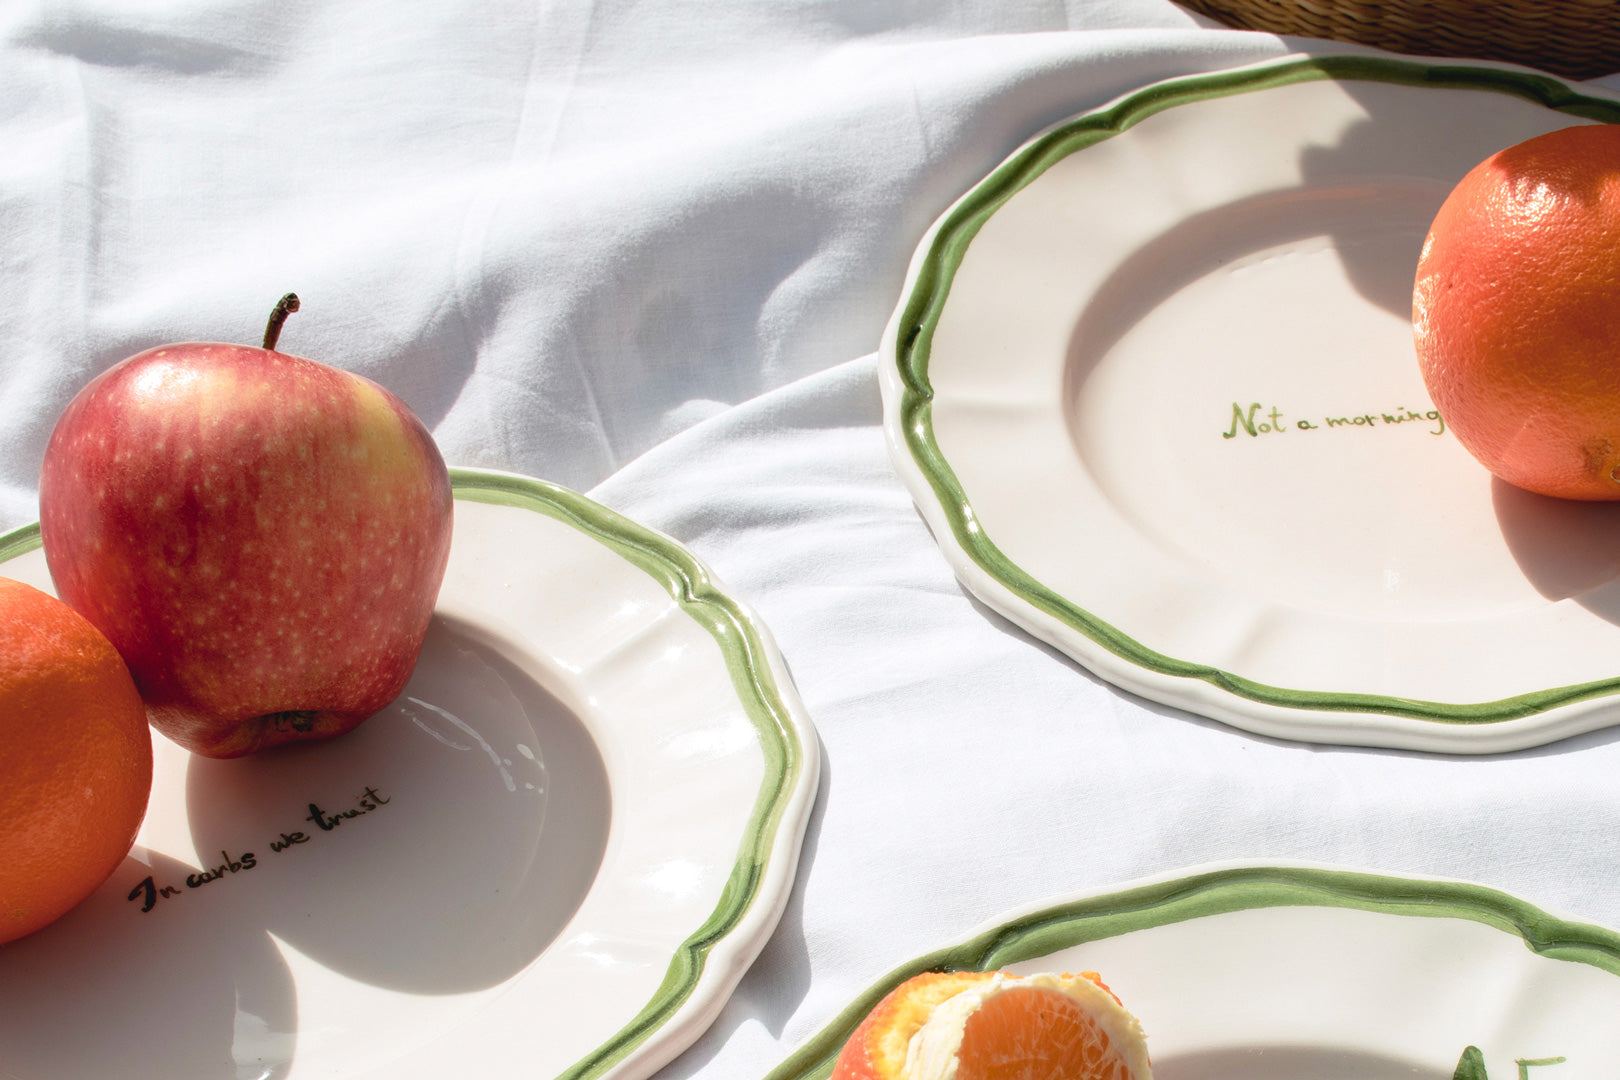 Picnic setting with fresh apples and citrus fruit on reusable ceramic plates with green borders, lying on a white blanket.